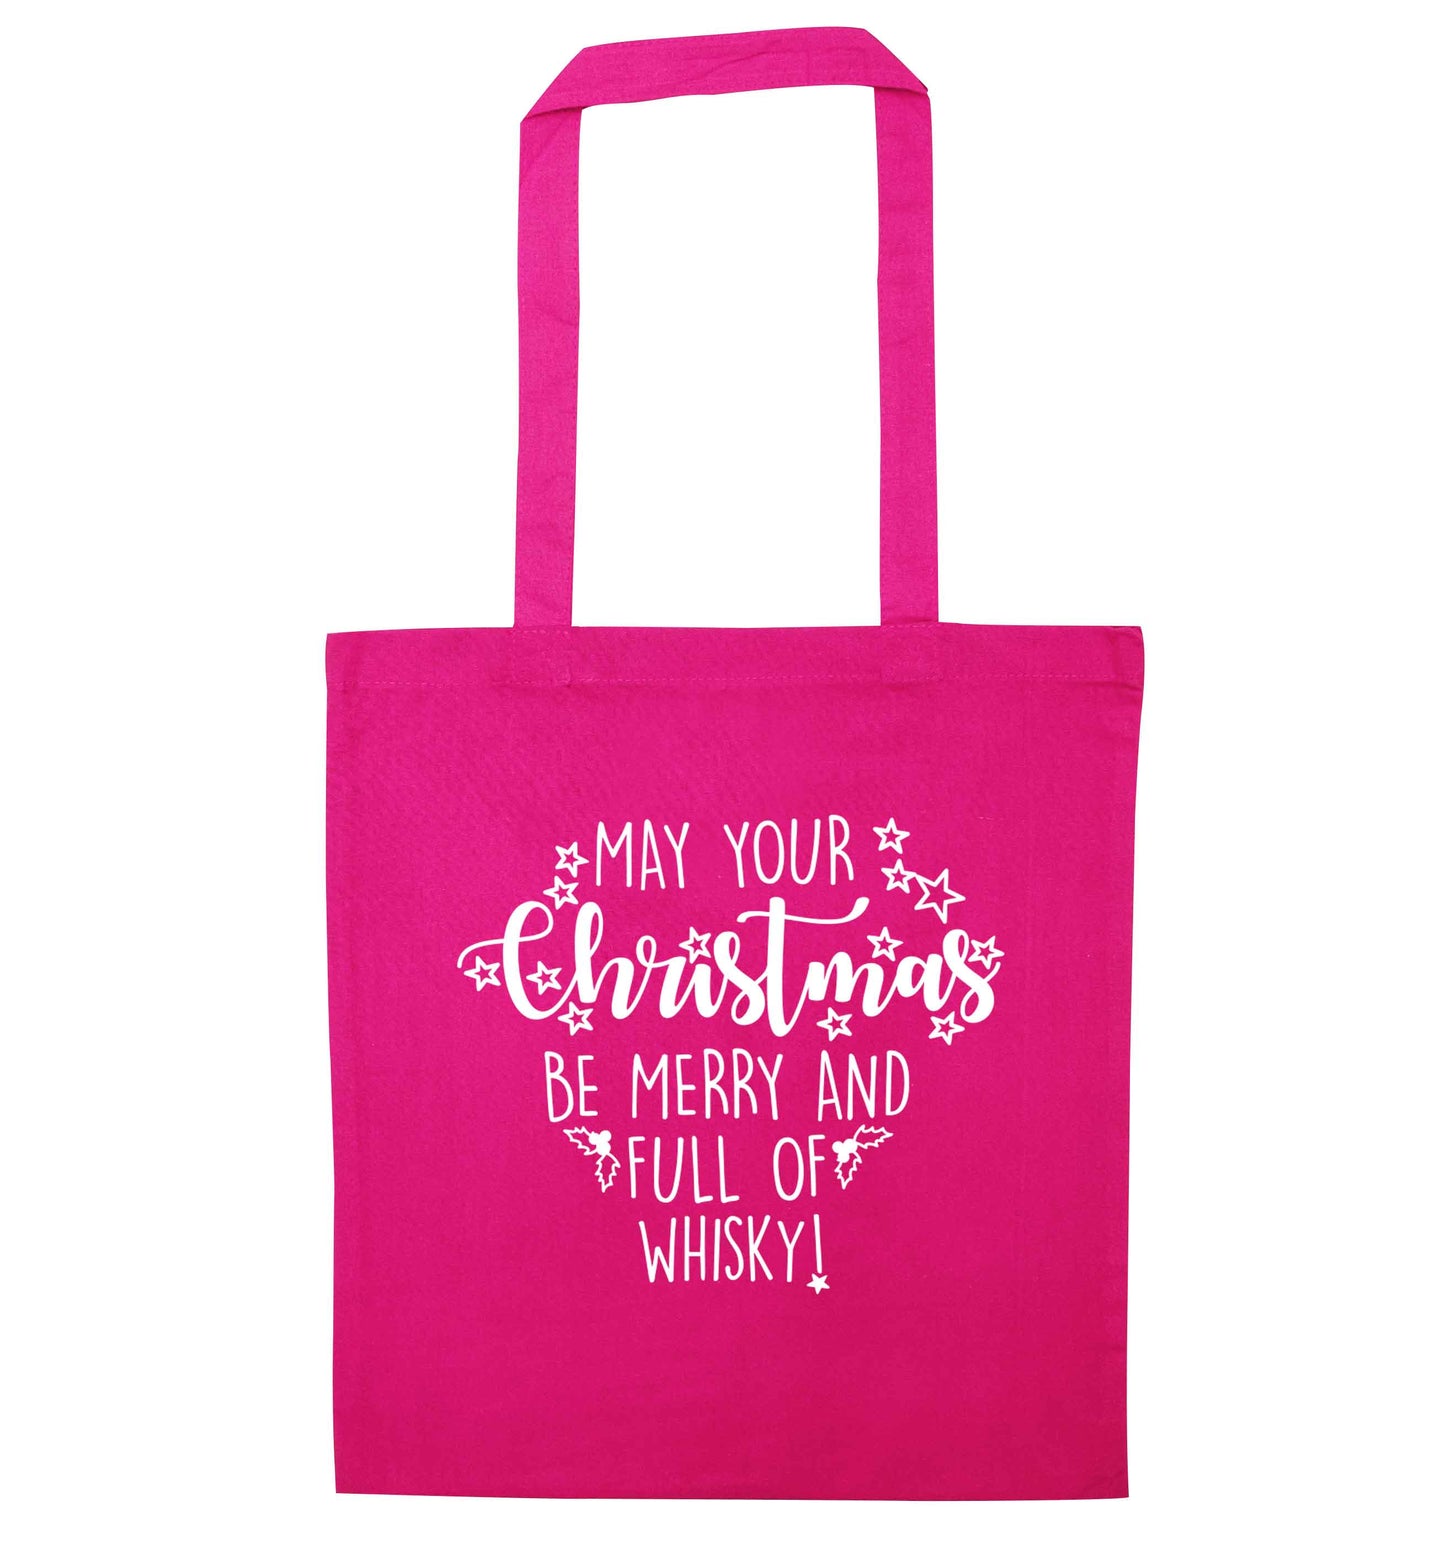 May your Christmas be merry and full of whisky pink tote bag